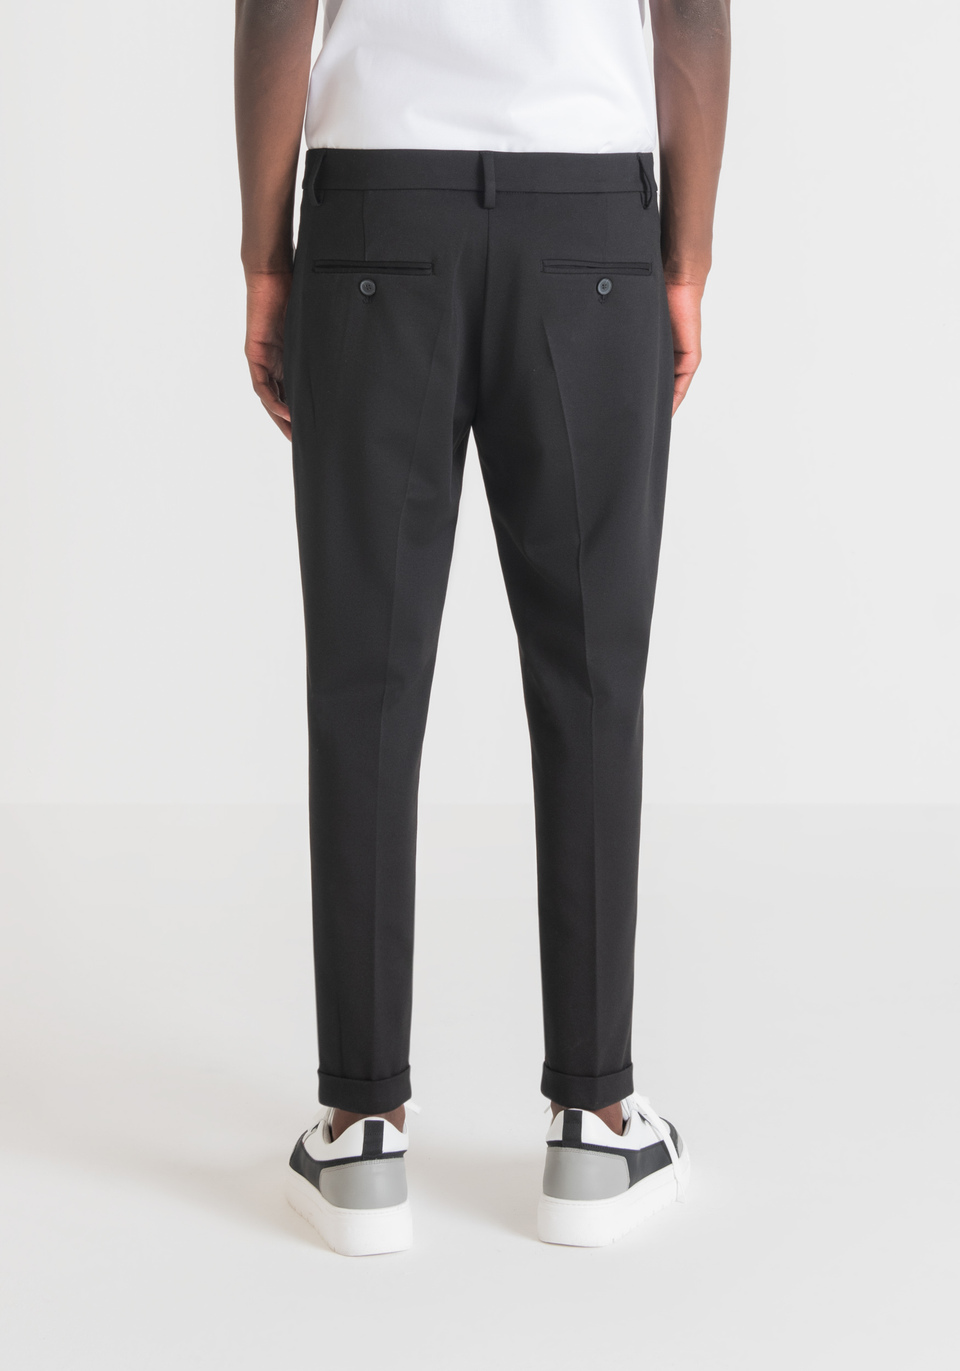 "ASHE" SUPER SKINNY FIT TROUSERS IN SOFT-TOUCH STRETCH FABRIC - Antony Morato Online Shop